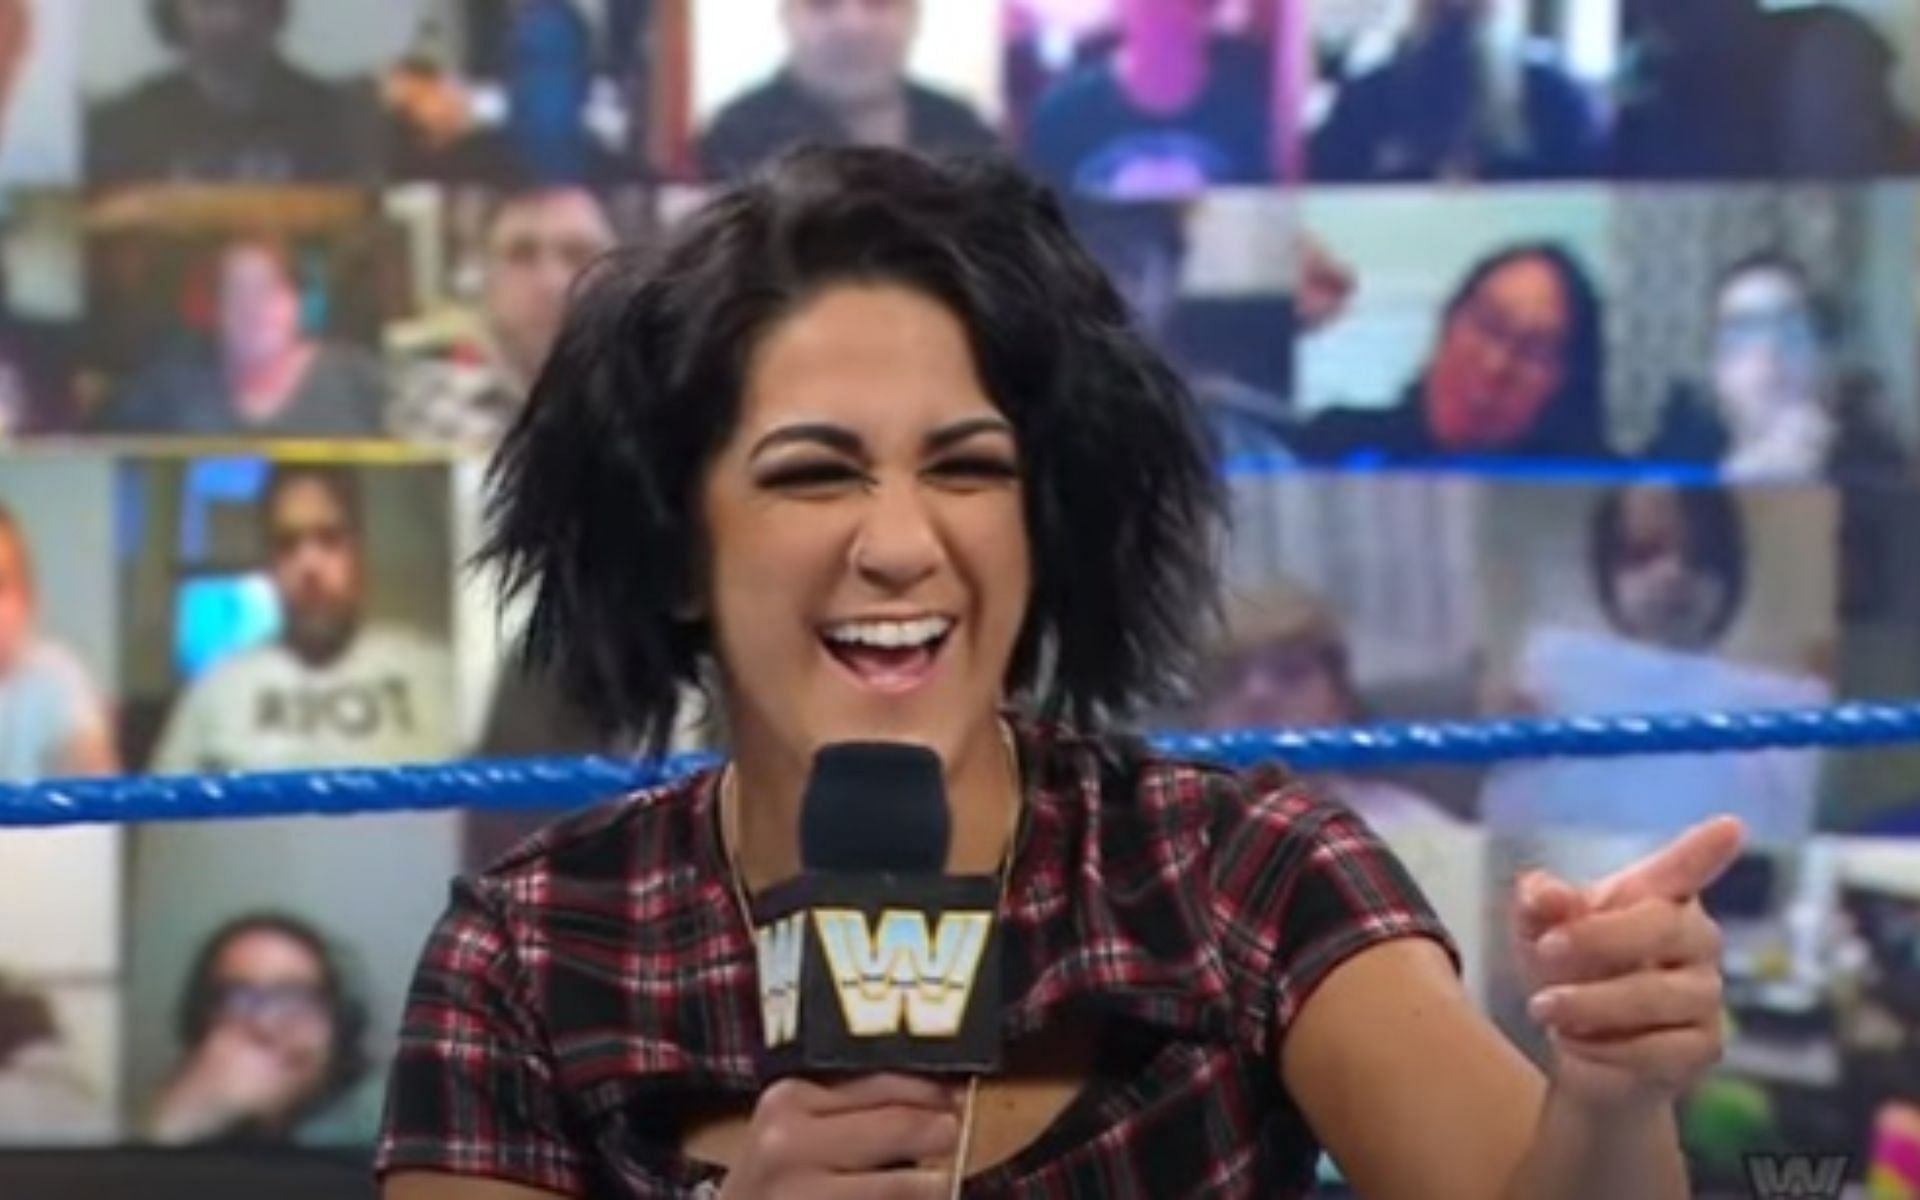 The former MITB winner secured her spot in the ladder match on SmackDown